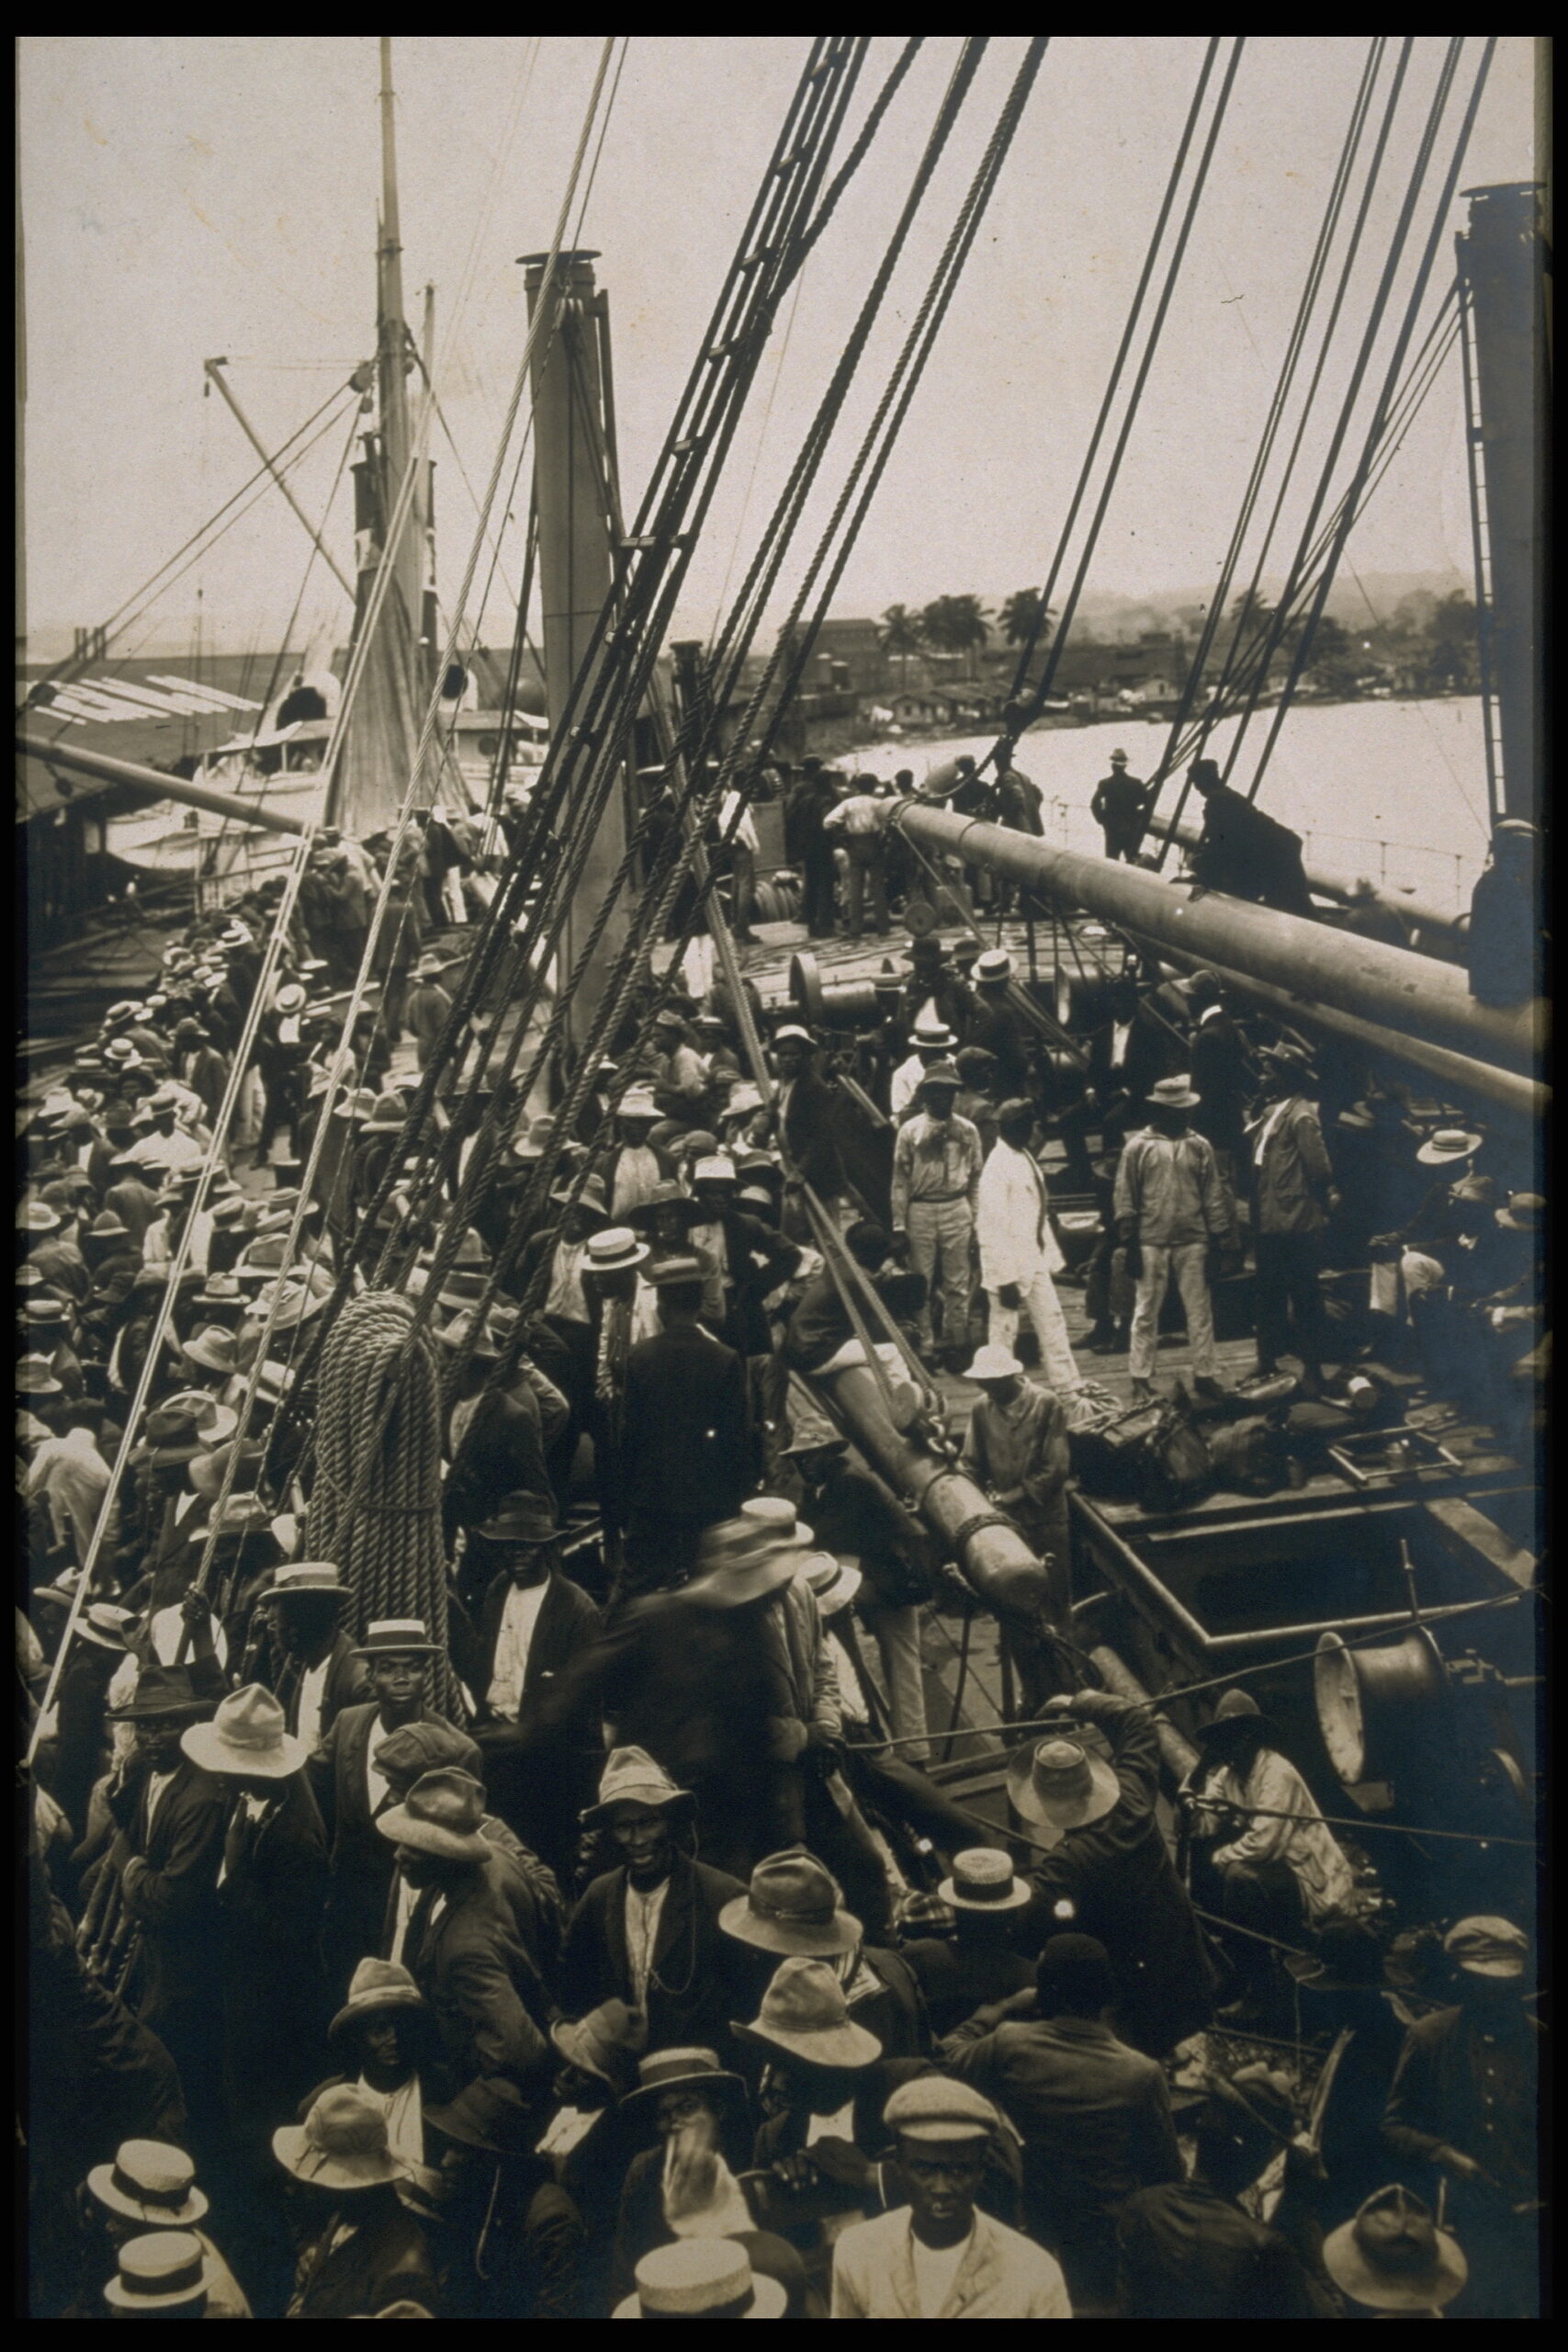 Workers from Barbados arriving at Cristobal Port, on th SS Ancon American steamship